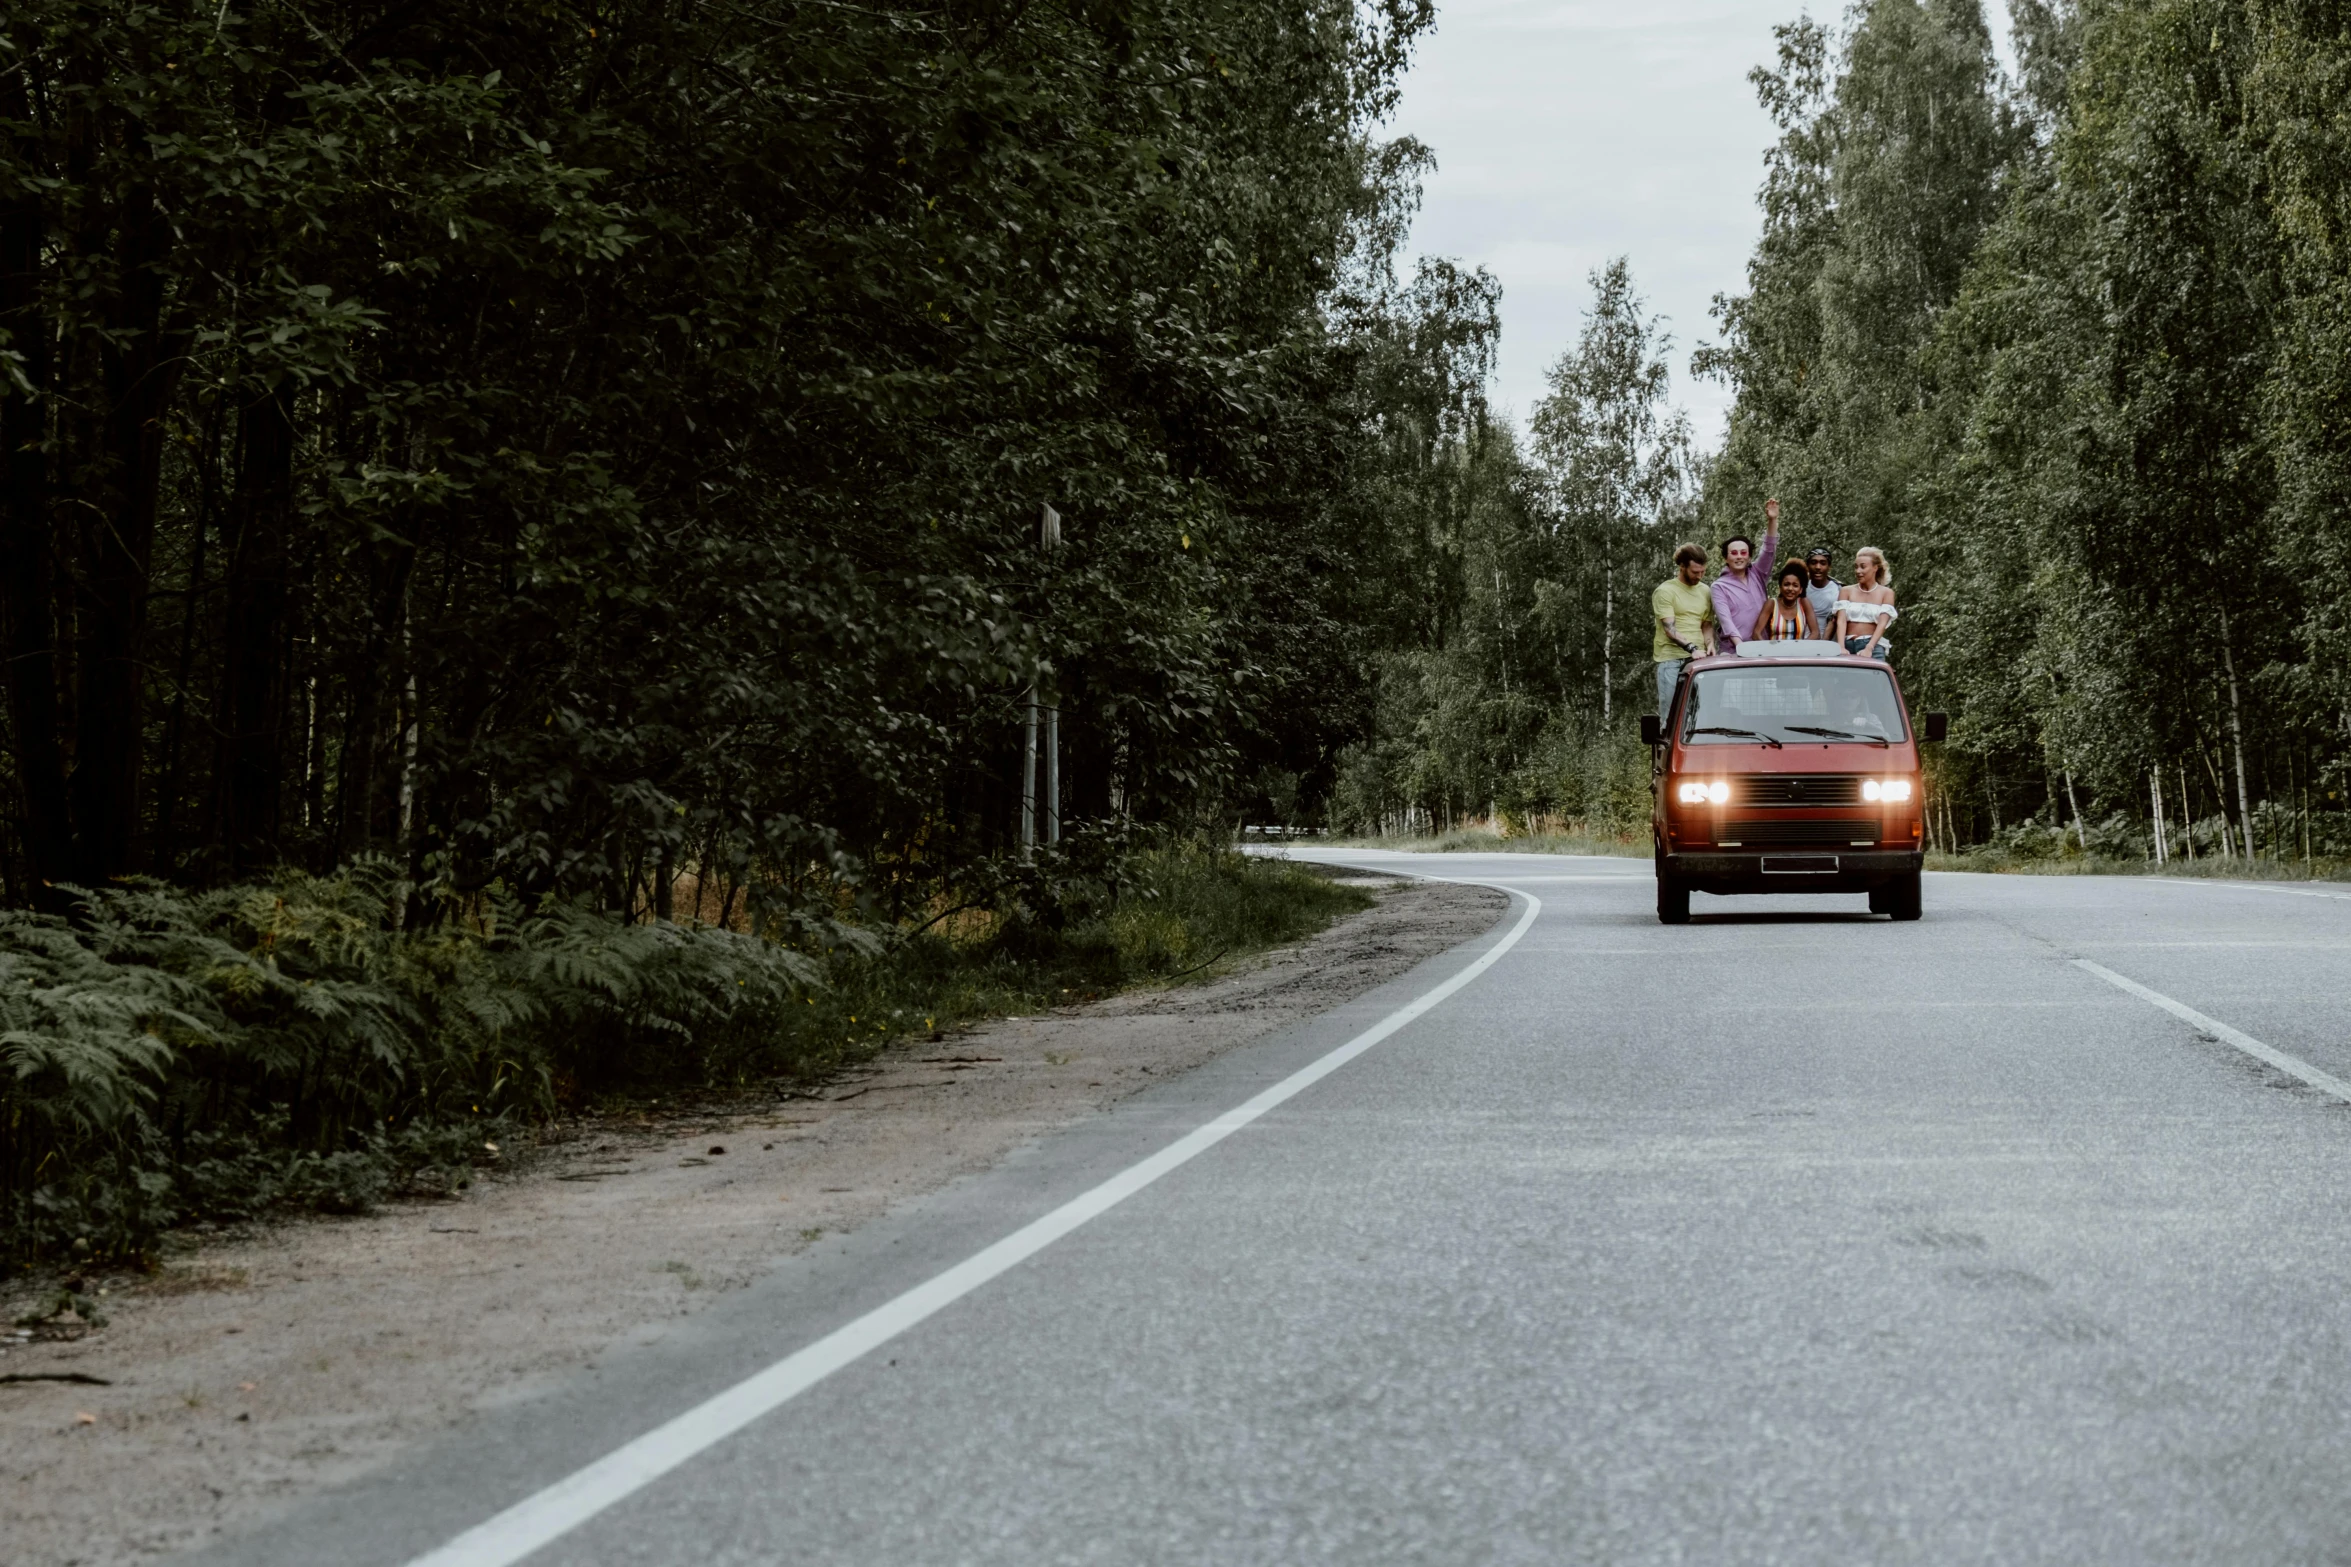 a group of people riding in the back of a van down a road, by Jaakko Mattila, pexels contest winner, hurufiyya, midsummer, lada car, thumbnail, high resolution image